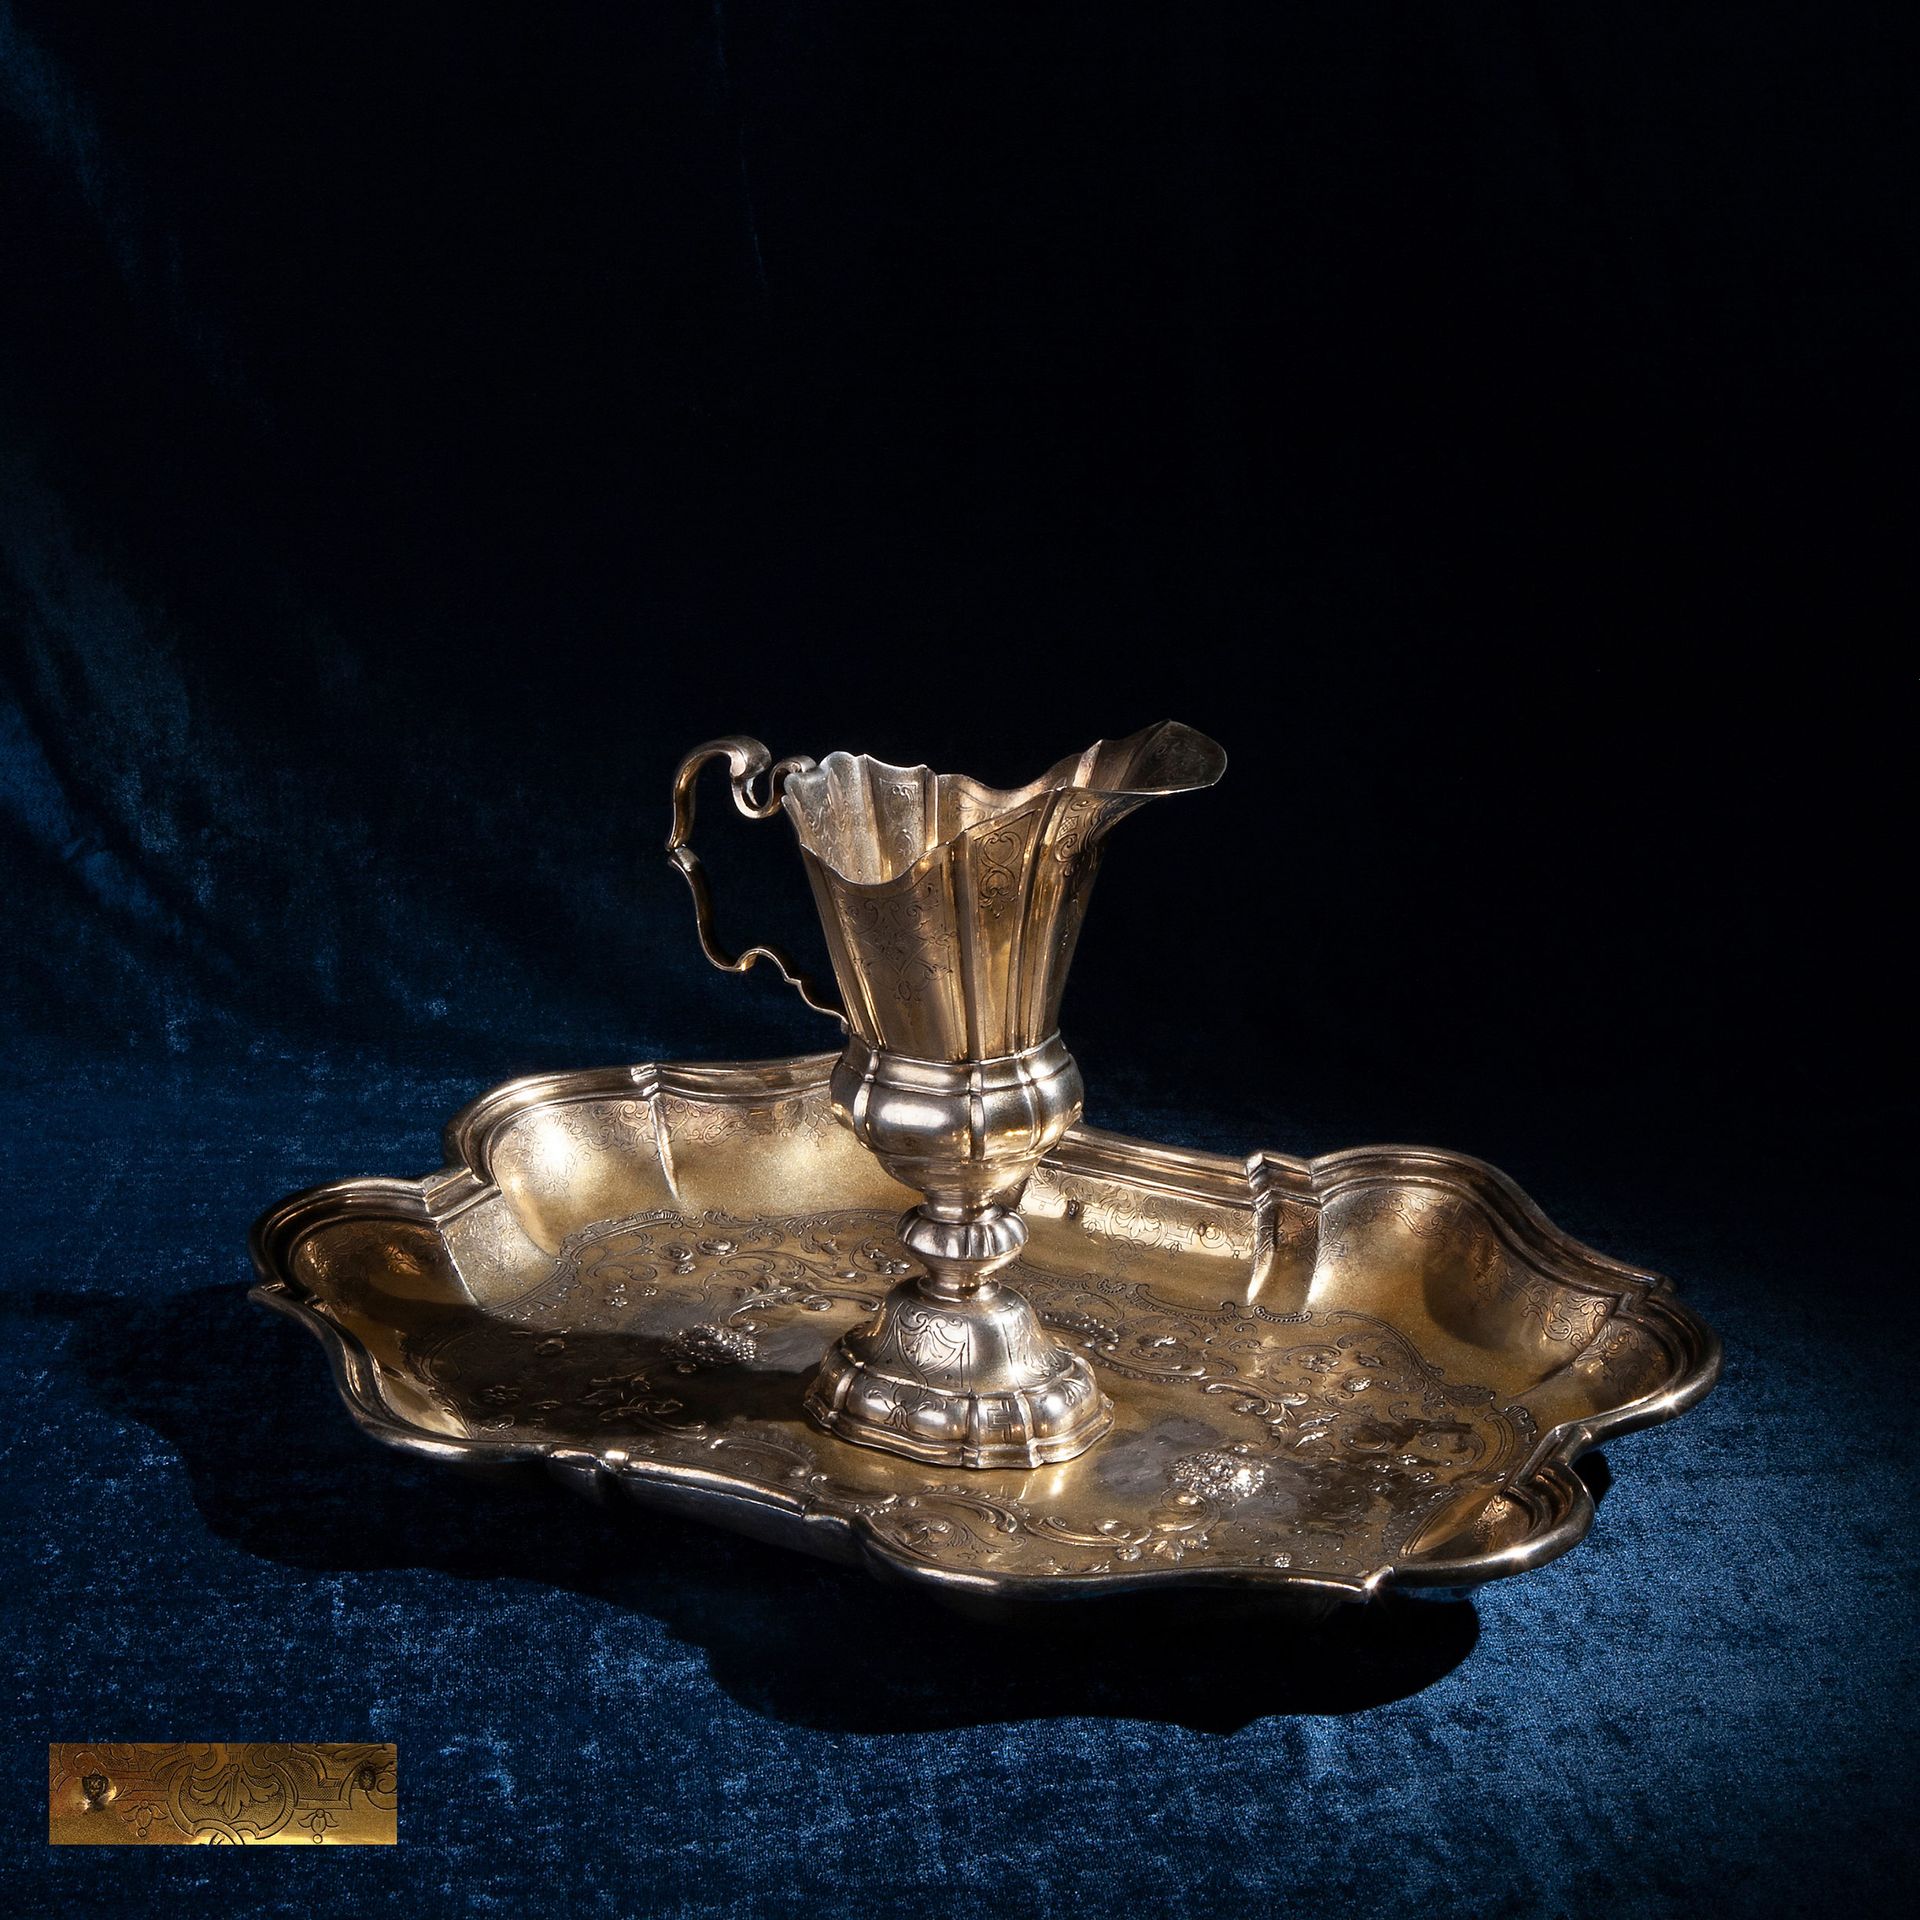 Silver jug and basin with gilded parts, first half of the 18th century 德国制造，奥斯堡 &hellip;